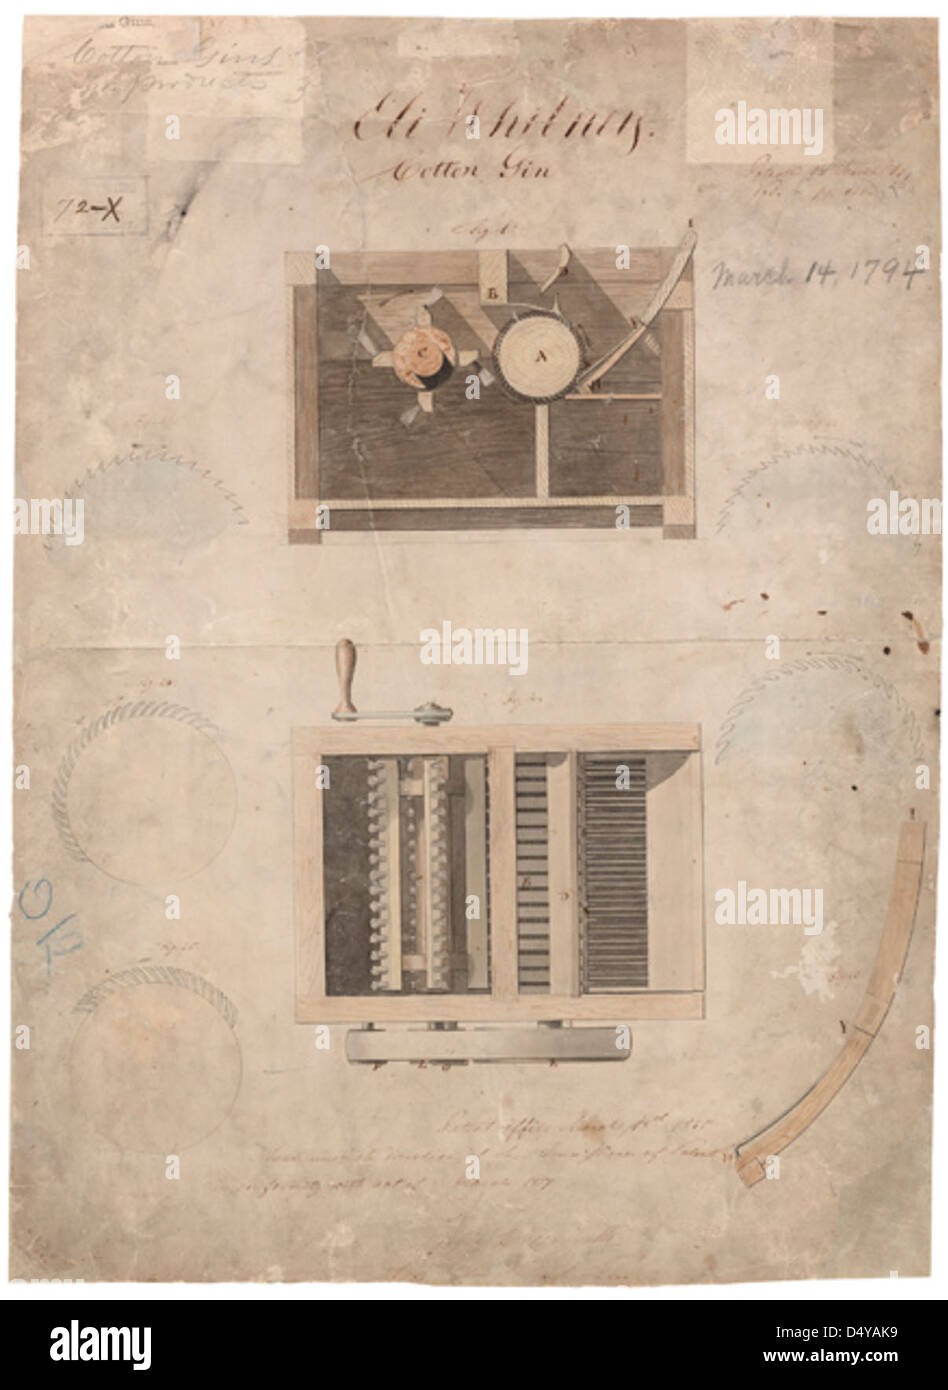 Eli Whitney's Cotton Gin Patent Drawing, 03/14/1794, Page 1 Stock Photo